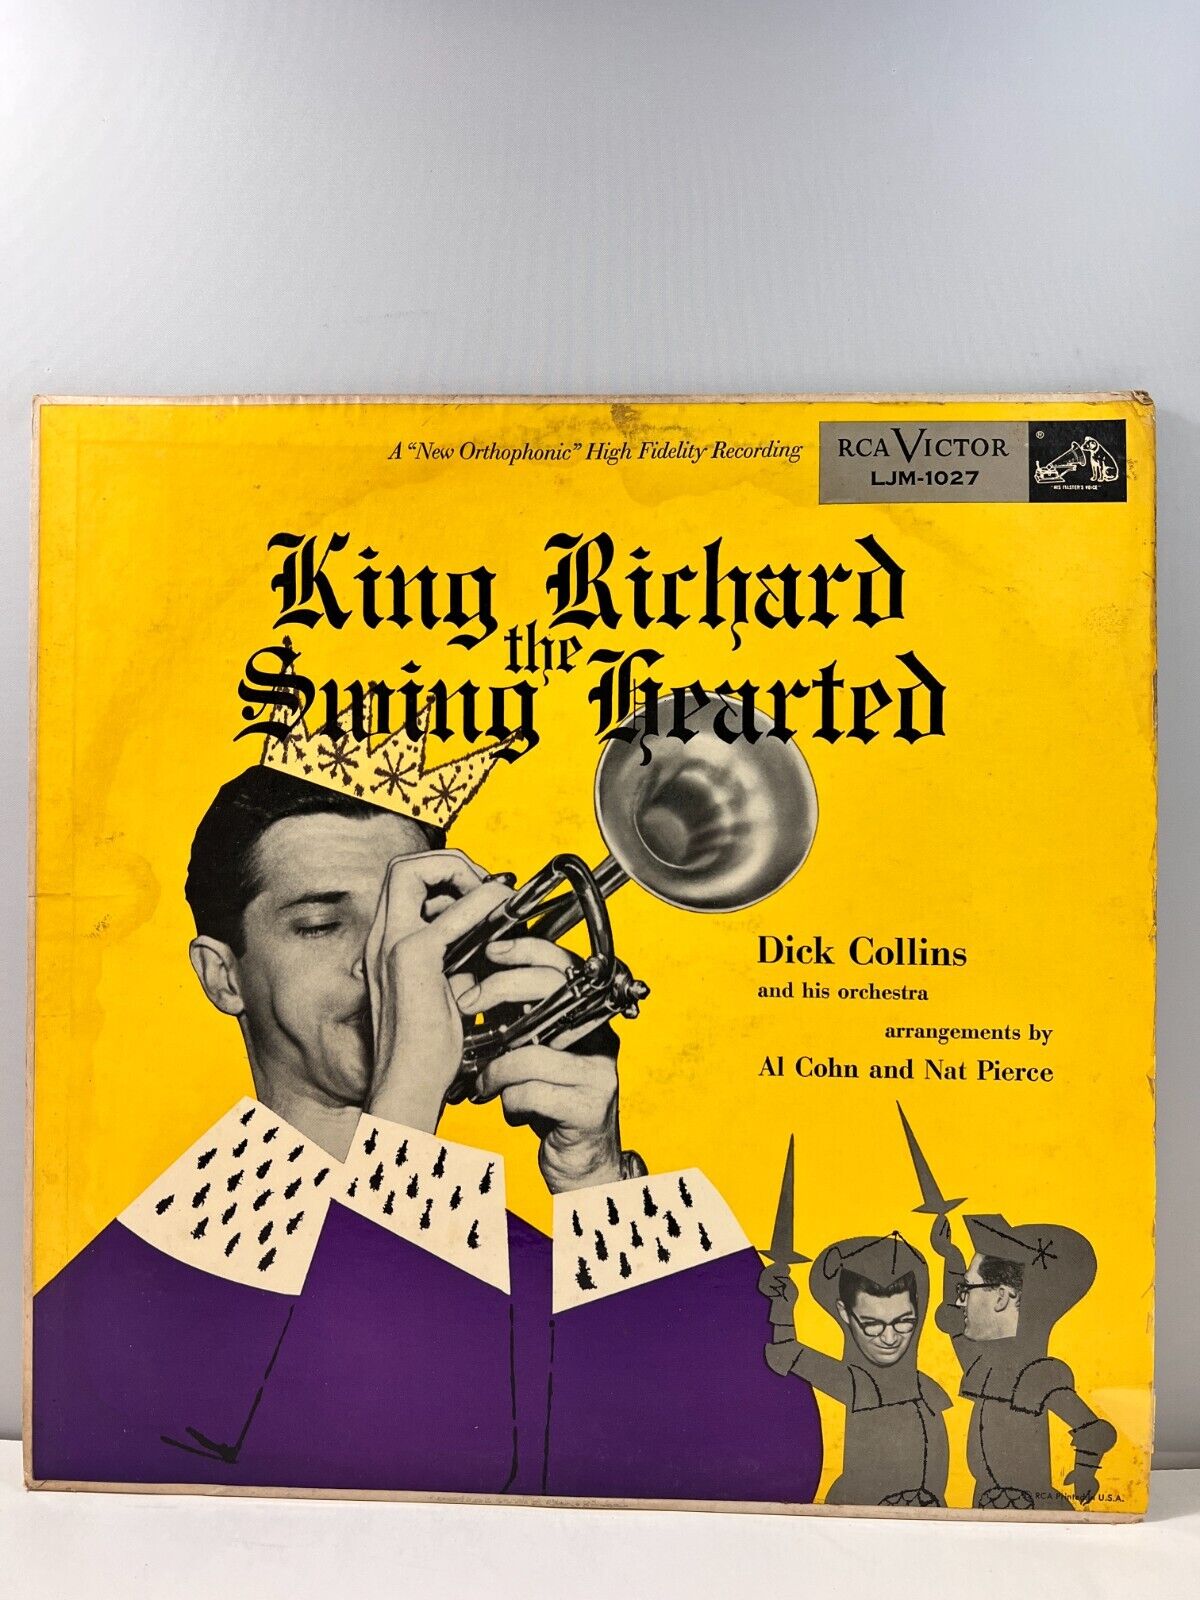 A53 DICK COLLINS: King Richard the Swing Hearted, 1955 RCA Victor LJM-1027 -Jazz